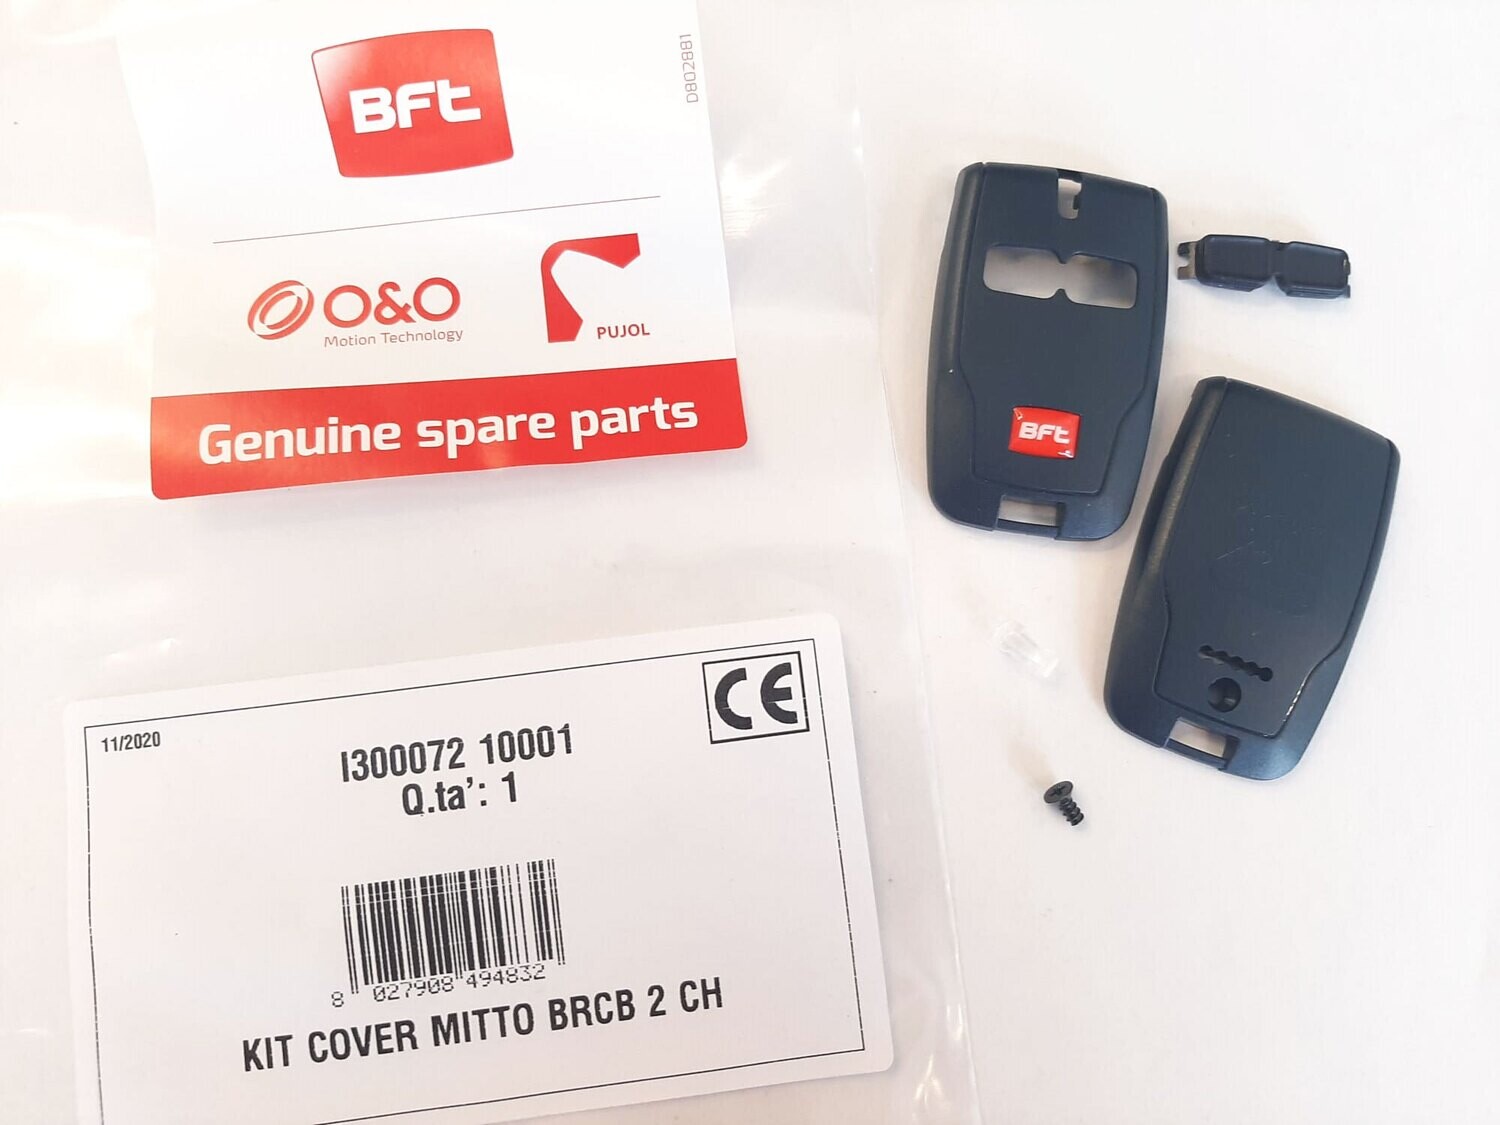 KIT COVER MITTO B2